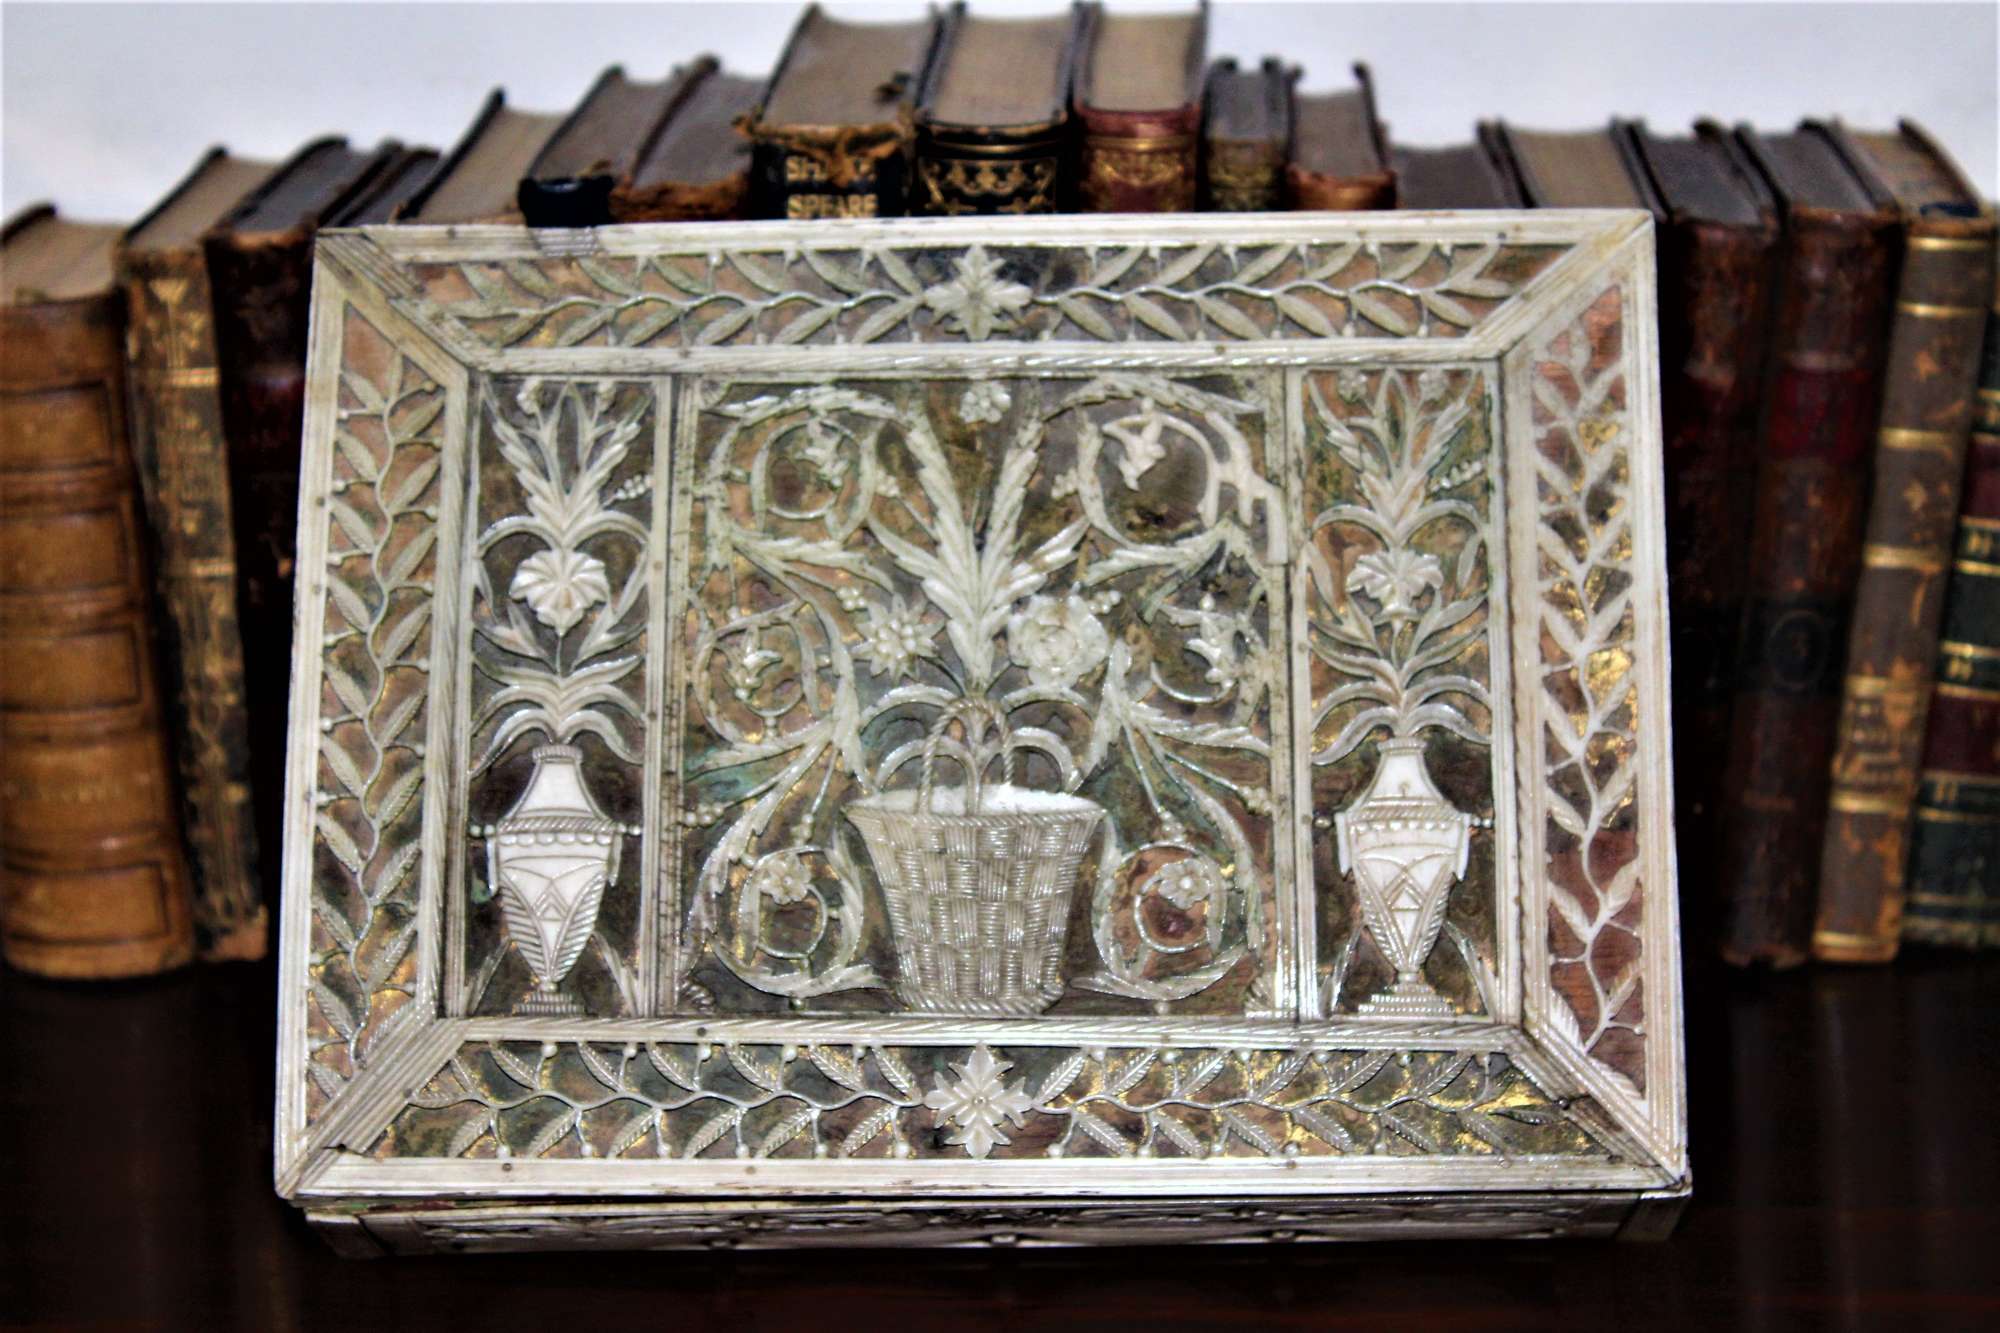 A Very Fine And Intricately Carved Bone Box Of Russian Origin